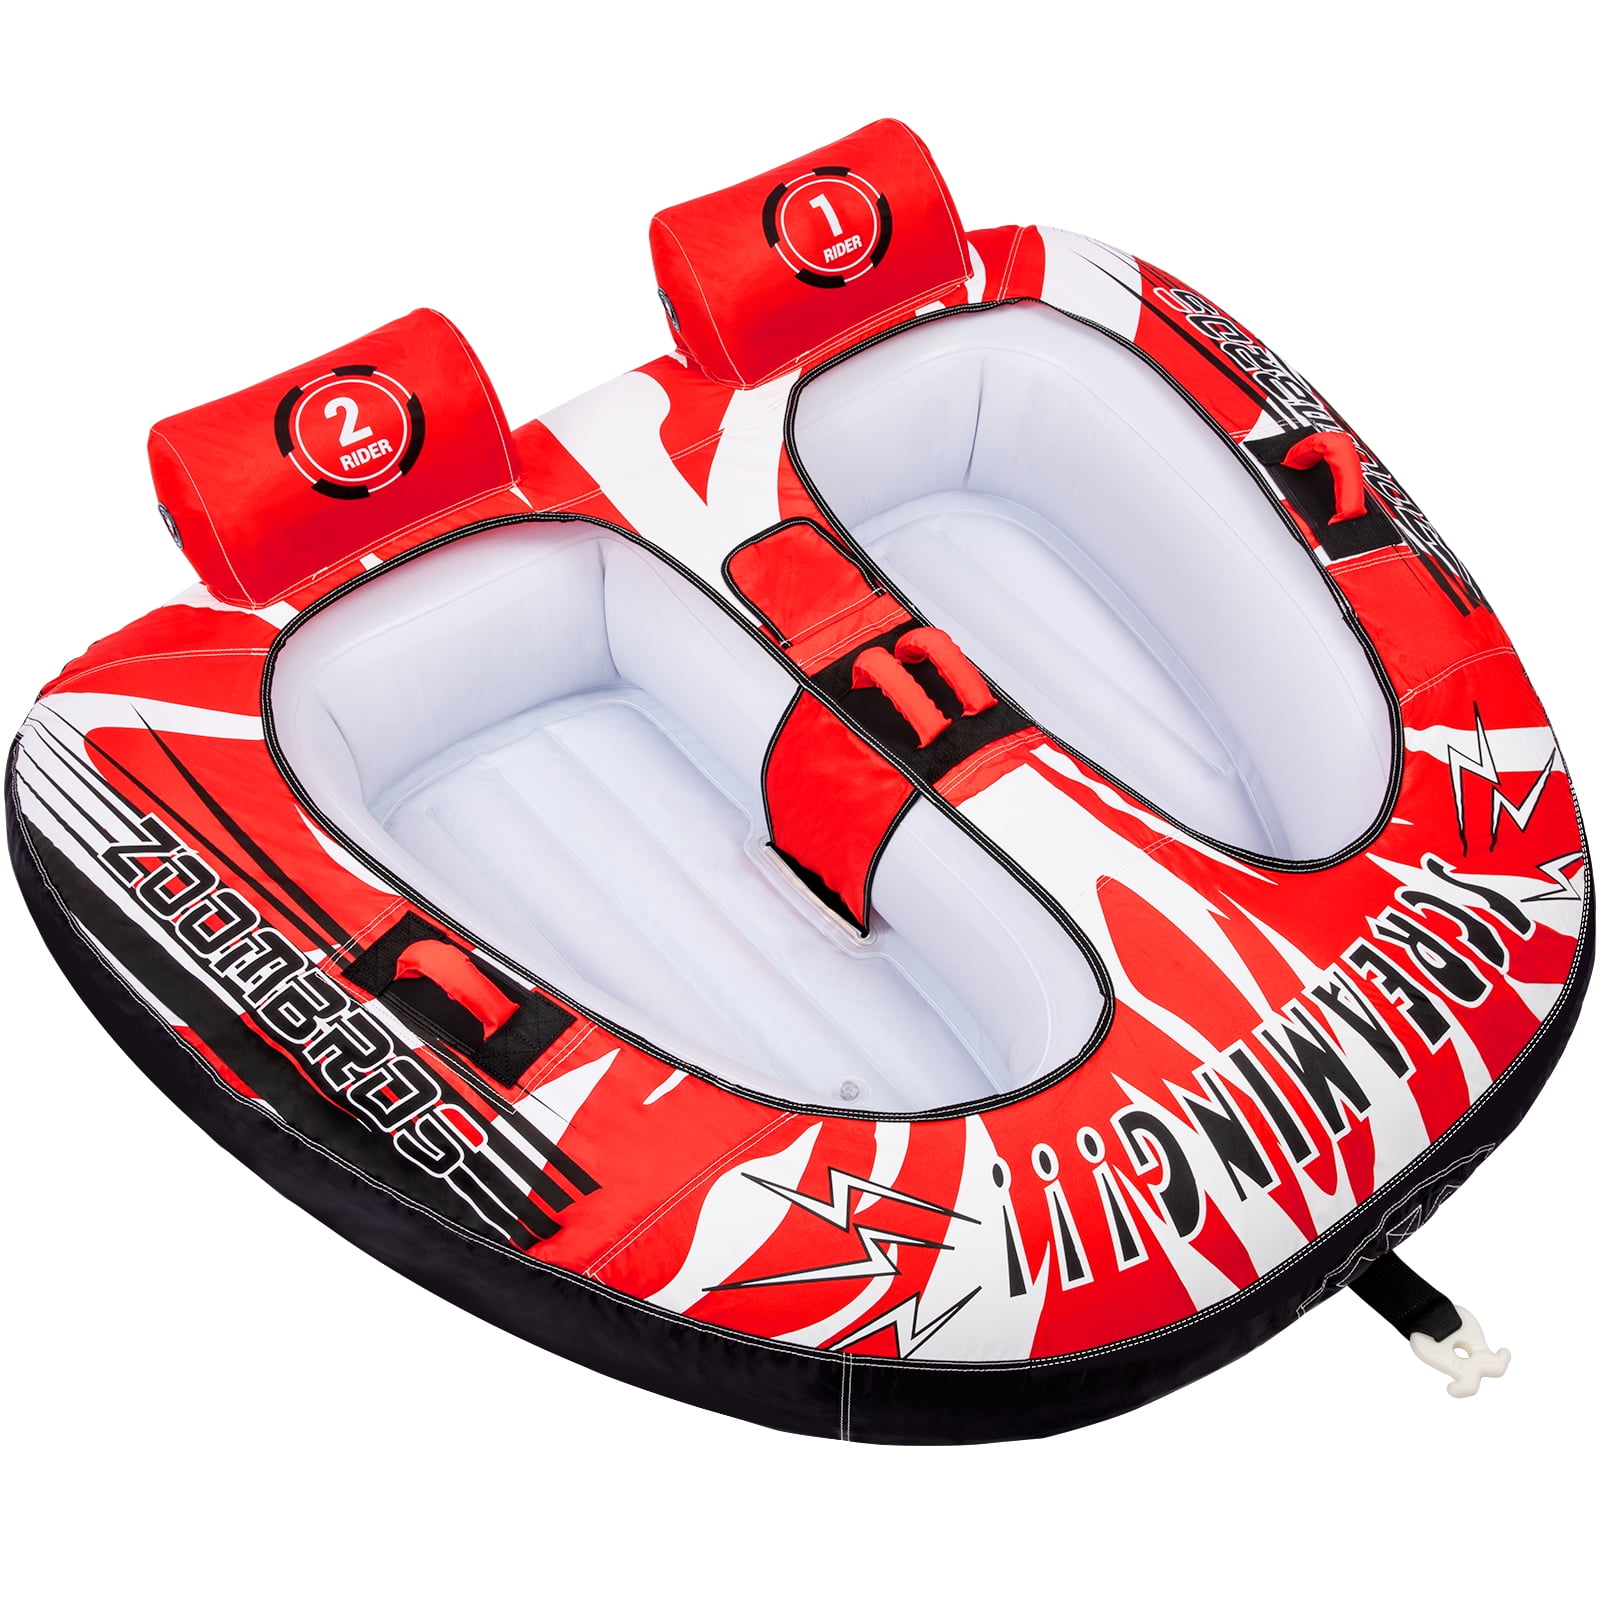 Zoombros Inflatable Towable S For